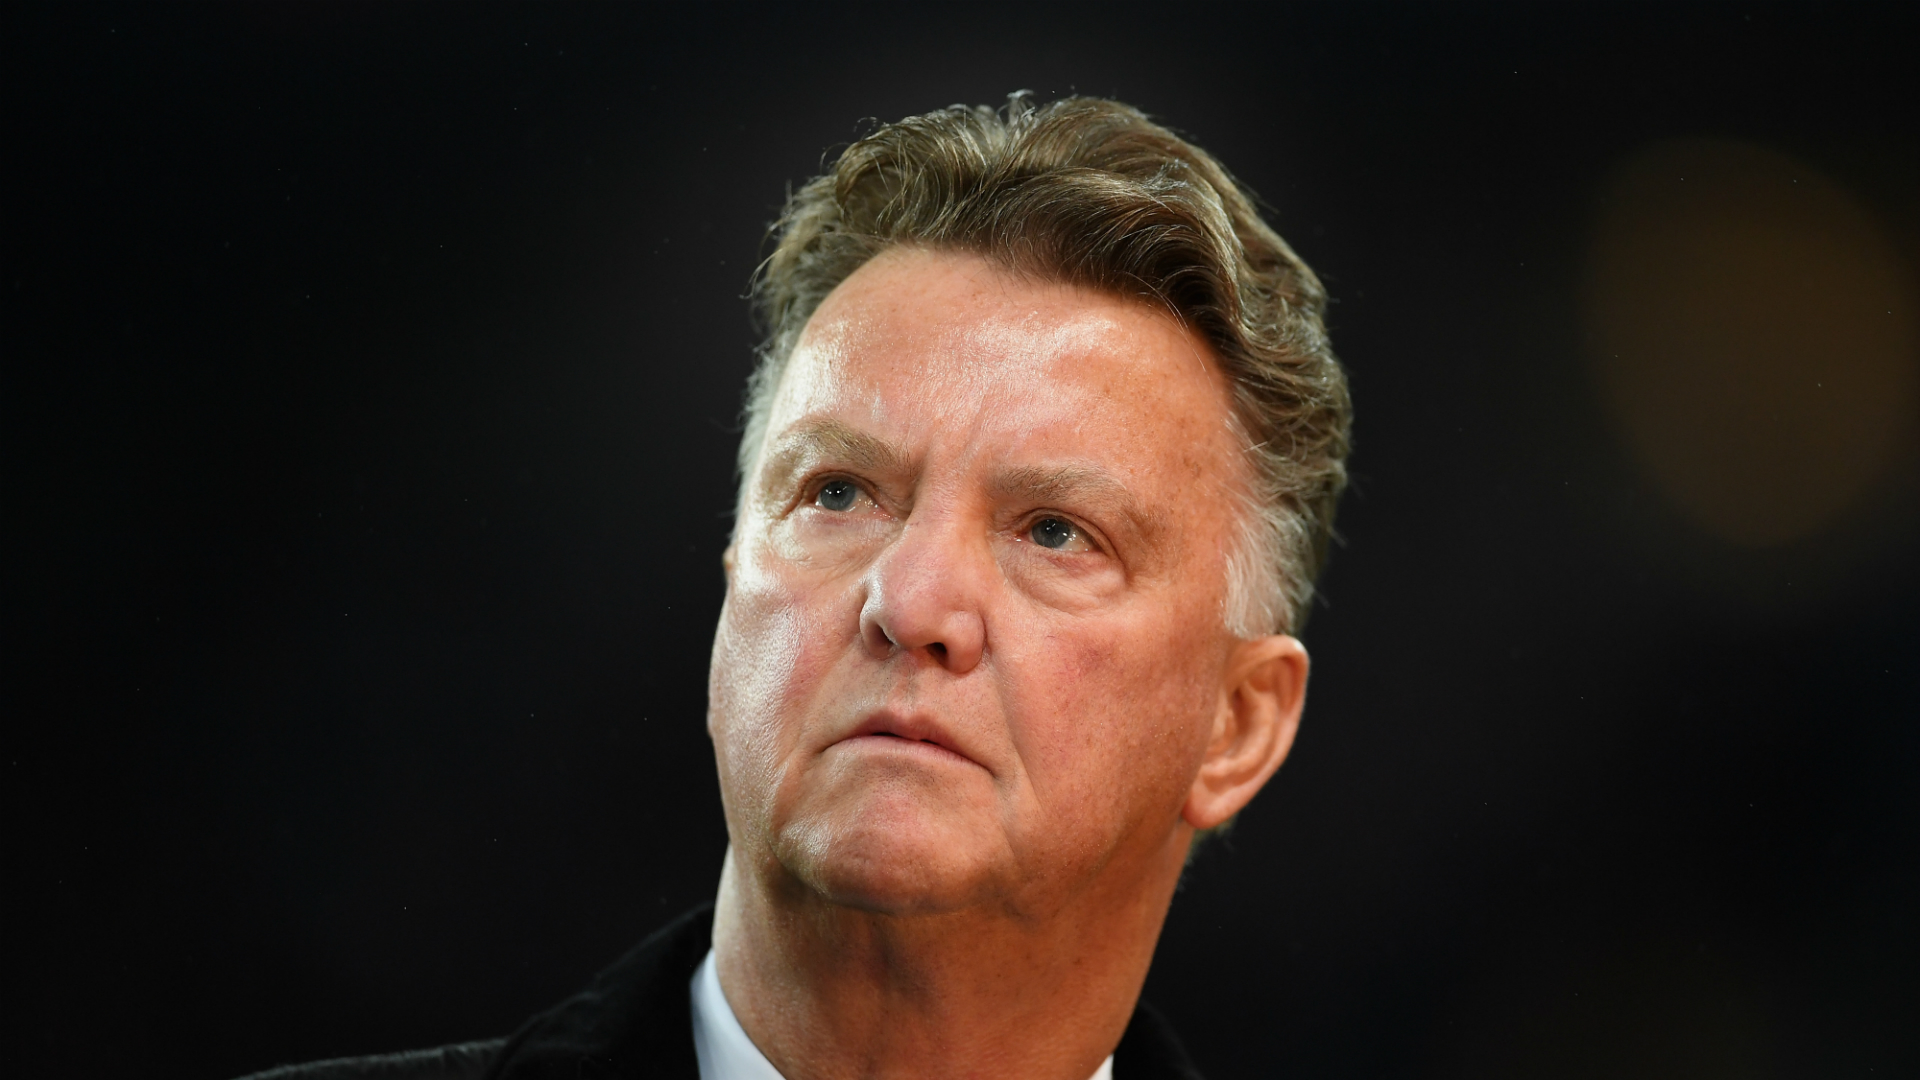 Manchester United sacked Louis van Gaal two years into a three-year deal, but he has hit out at the club's failure to land his top targets.